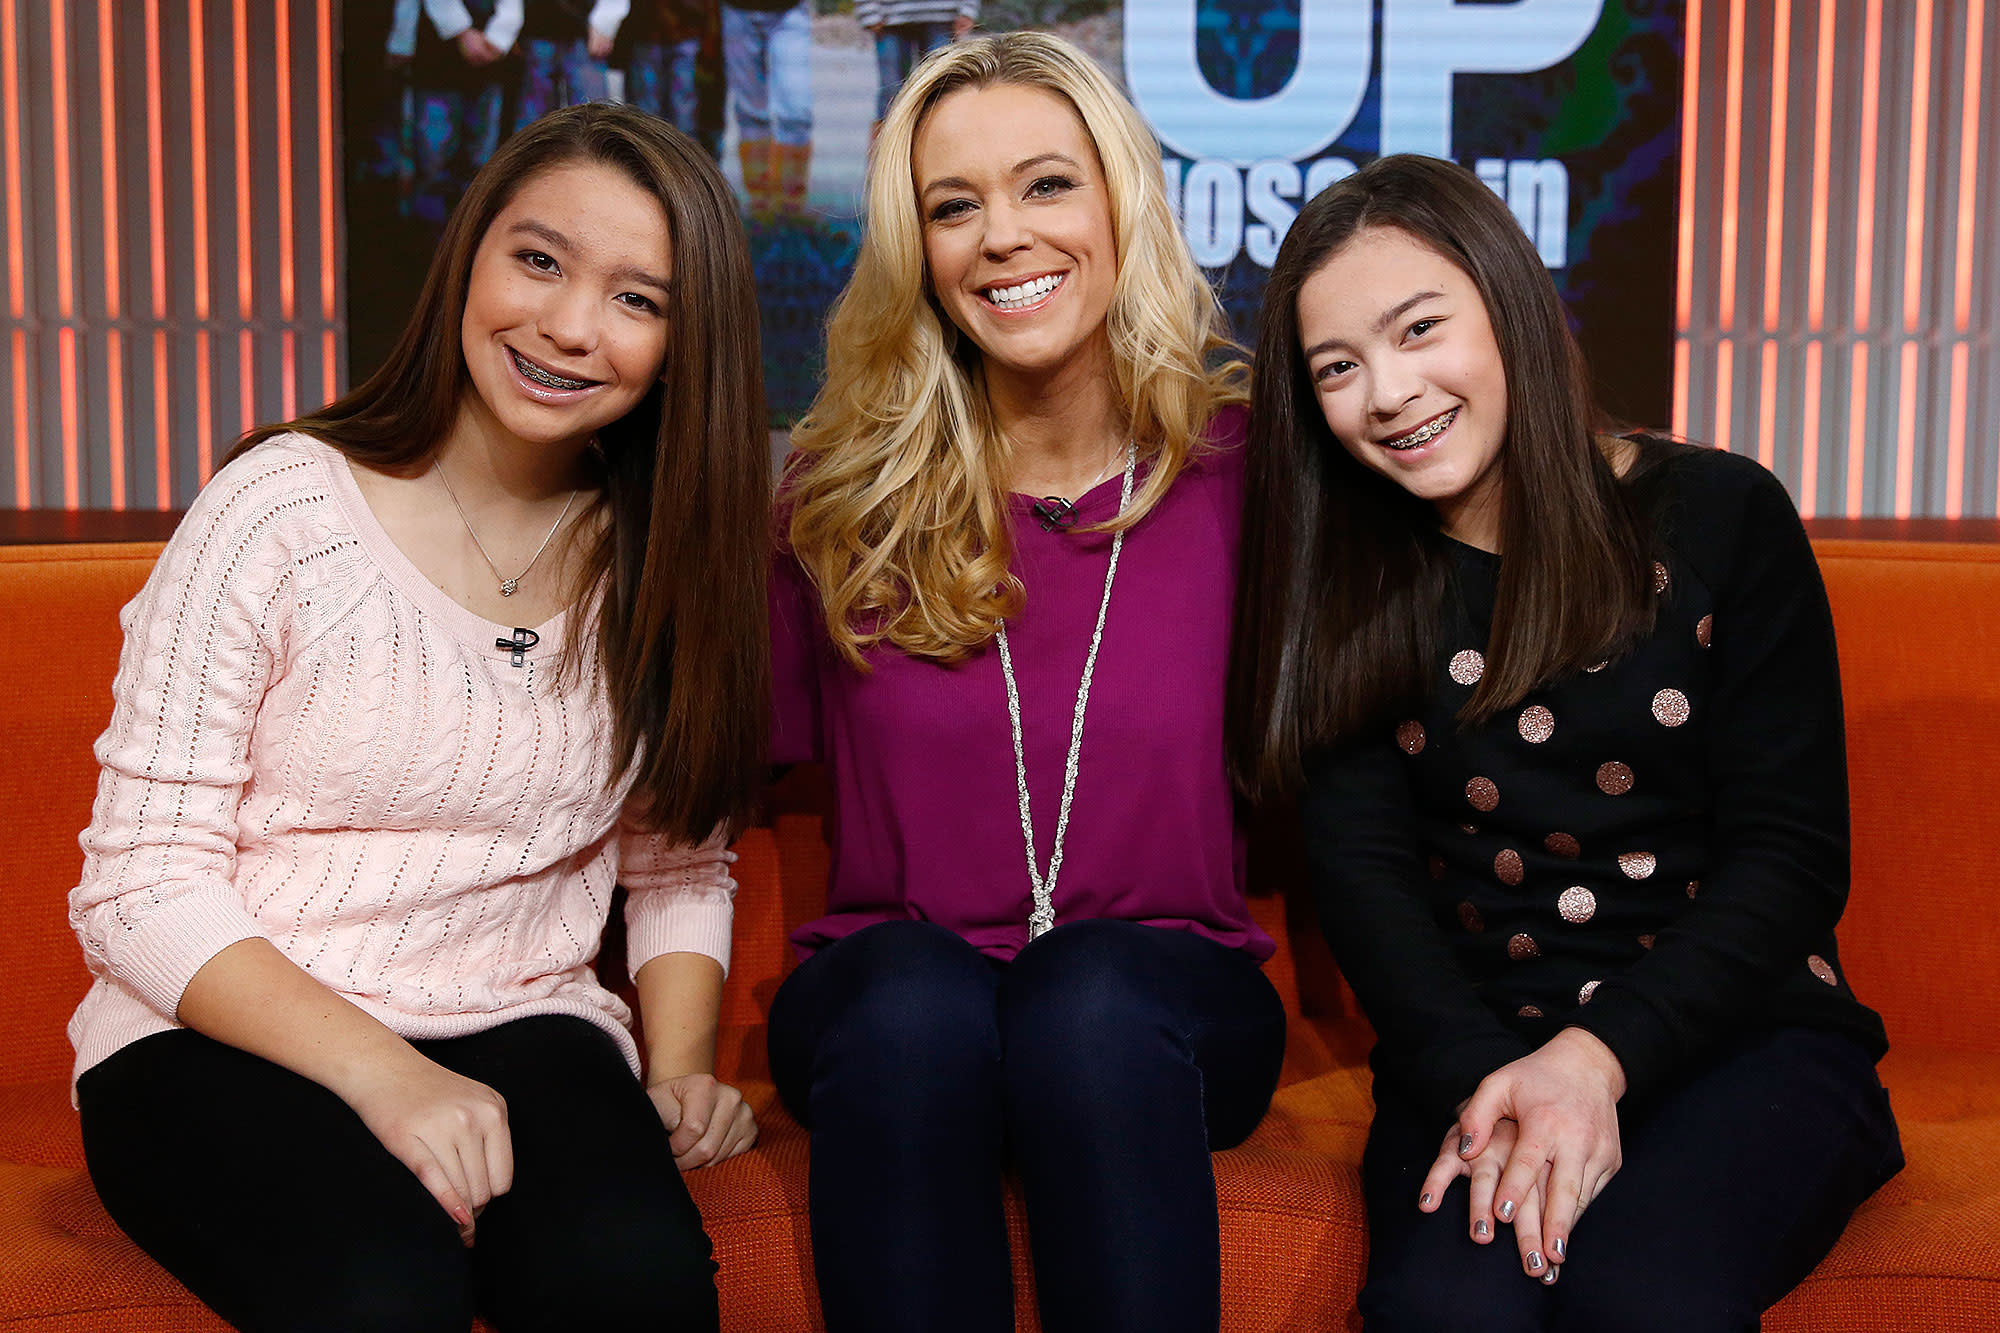 Kate Gosselin Celebrates Twins Cara and Madelyn's 18th Birthday 'You